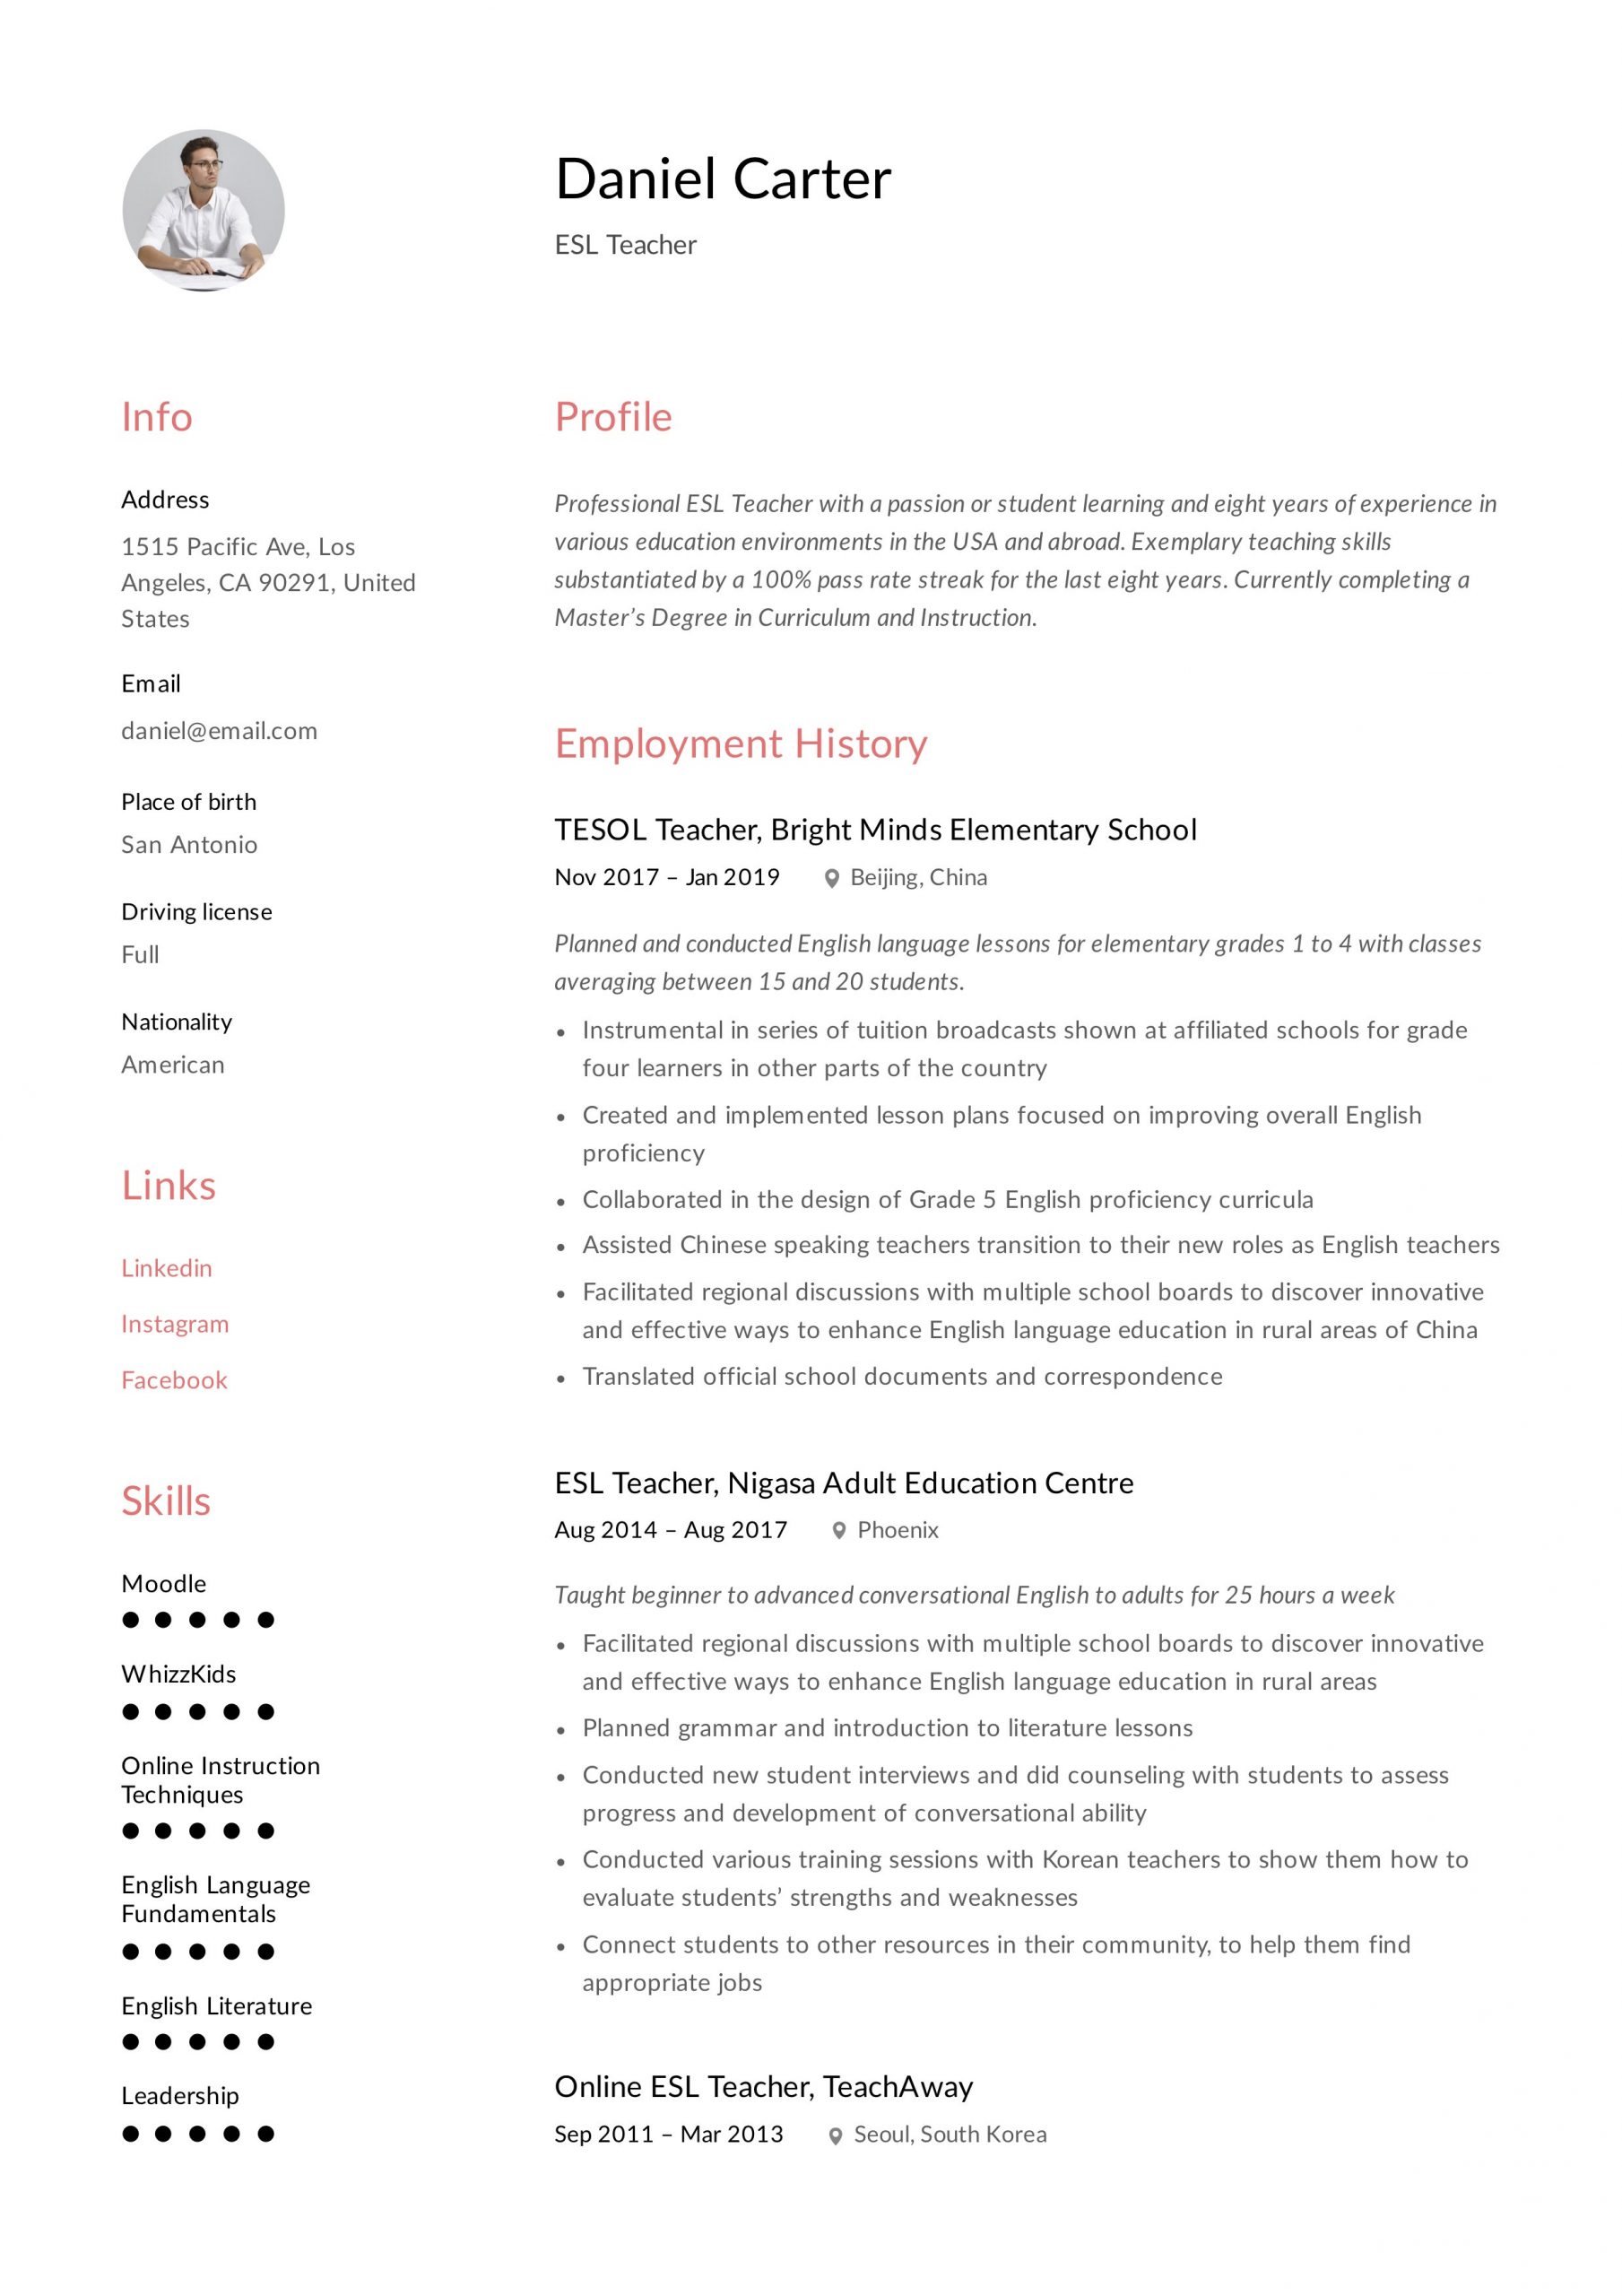 Sample Resume Teaching English as A Second Language 19 Esl Teacher Resume Examples & Writing Guide 2020